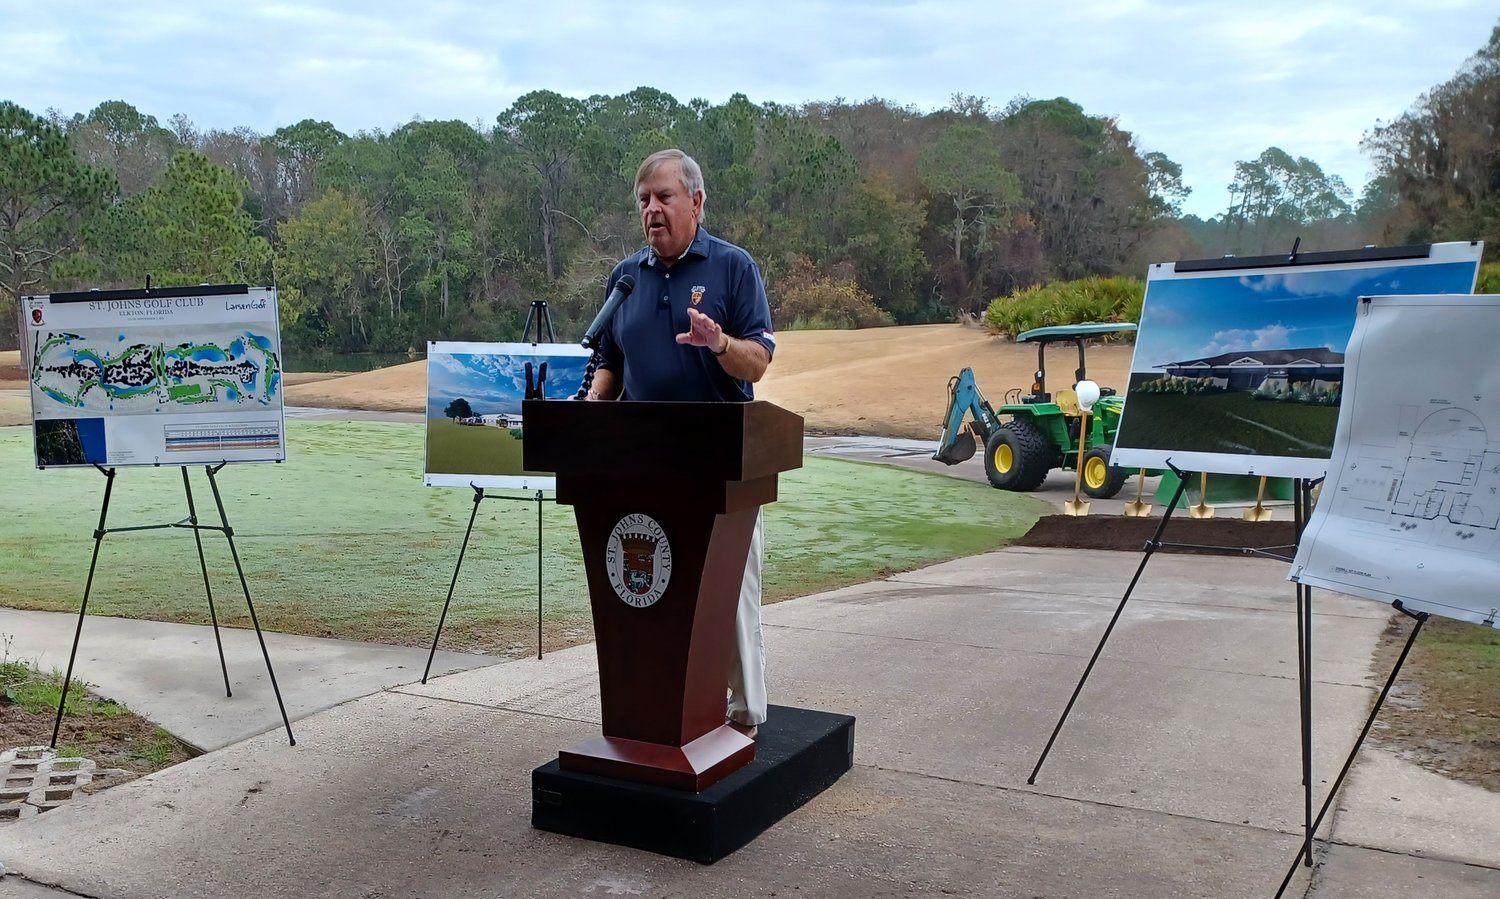 County Commissioner Henry Dean speaks during a groundbreaking ceremony for the renovation of the St. Johns Golf Club.